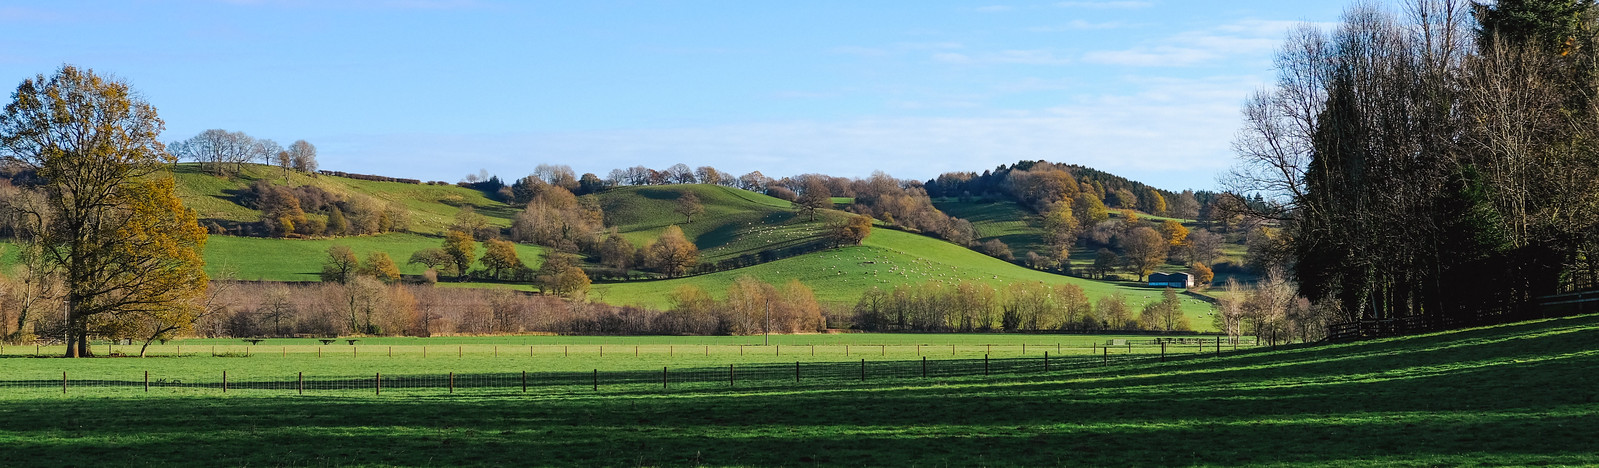 A view across a green field towards a green hill dotted with bare brown trees casting long shadows, under a clear sky